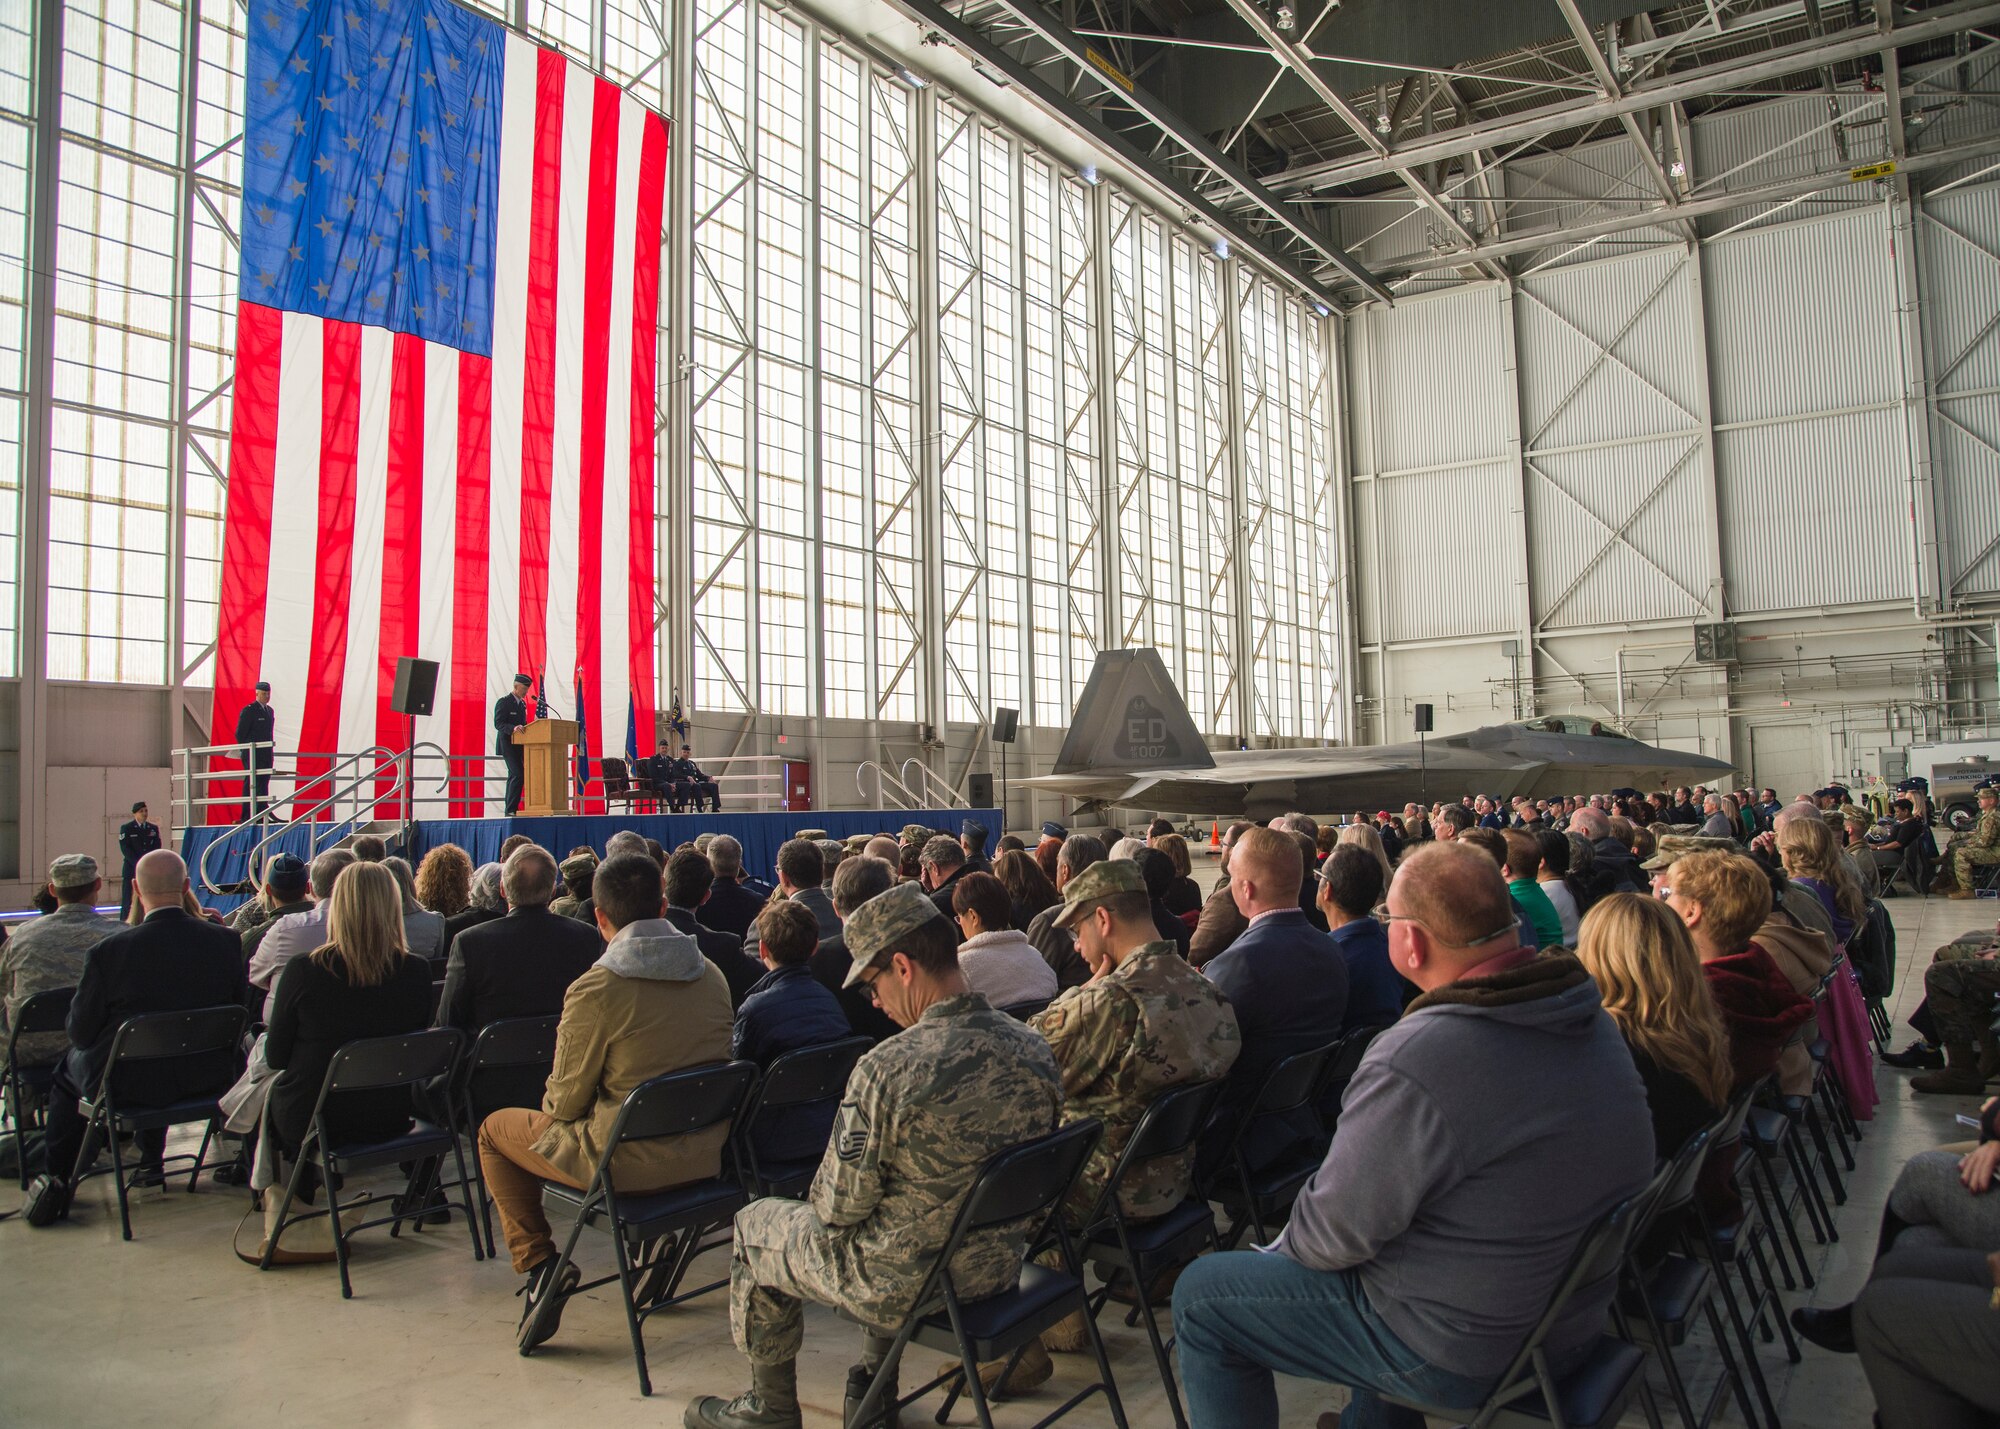 Maj. Gen. Christopher Azzano, Air Force Test Center Commander, gives remarks during the 412th Test Wing Change of Command Ceremony between outgoing commander, Brig. Gen. E. John Teichert, and incoming commander, Col. Matthew Higer, at Edwards Air Force Base, California, Feb. 5. (Air Force photo by Giancarlo Casem)